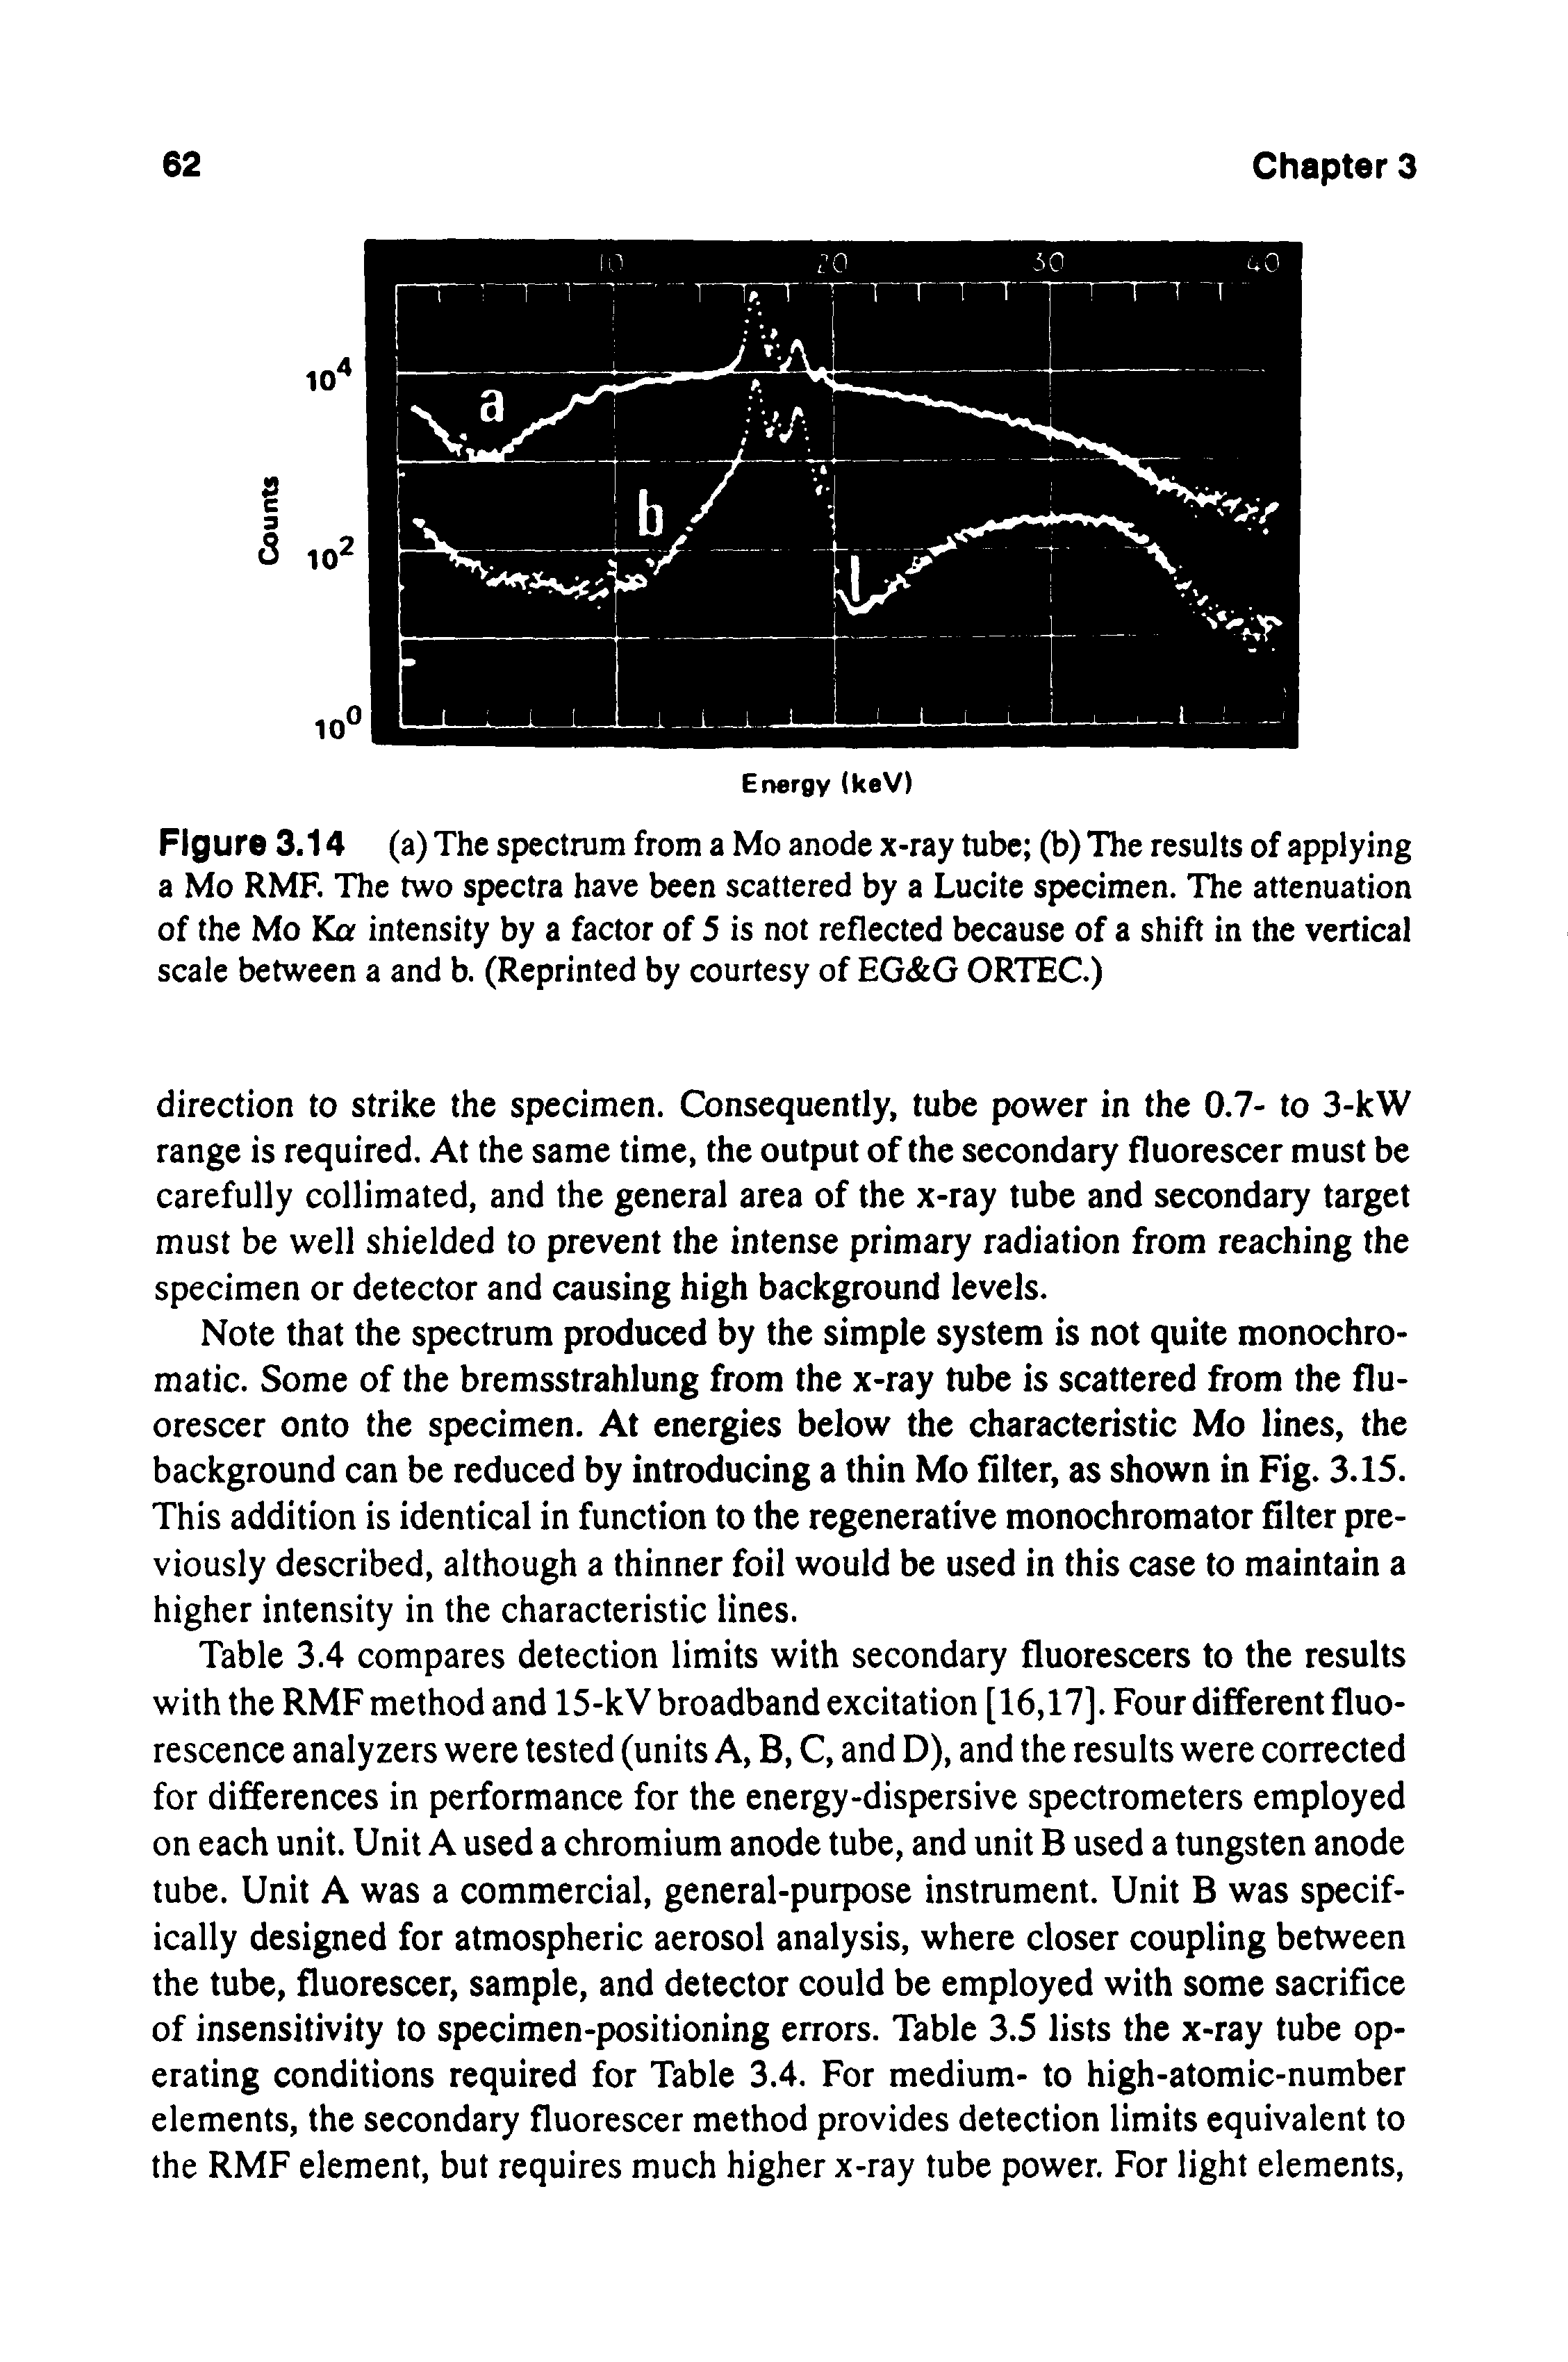 Table 3.4 compares detection limits with secondary fluorescers to the results with the RMF method and 15-kV broadband excitation [16,17]. Four different fluorescence analyzers were tested (units A, B, C, and D), and the results were corrected for differences in performance for the energy-dispersive spectrometers employed on each unit. Unit A used a chromium anode tube, and unit B used a tungsten anode tube. Unit A was a commercial, general-purpose instrument. Unit B was specifically designed for atmospheric aerosol analysis, where closer coupling between the tube, fluorescer, sample, and detector could be employed with some sacrifice of insensitivity to specimen-positioning errors. Table 3.5 lists the x-ray tube operating conditions required for Table 3.4. For medium- to high-atomic-number elements, the secondary fluorescer method provides detection limits equivalent to the RMF element, but requires much higher x-ray tube power. For light elements.